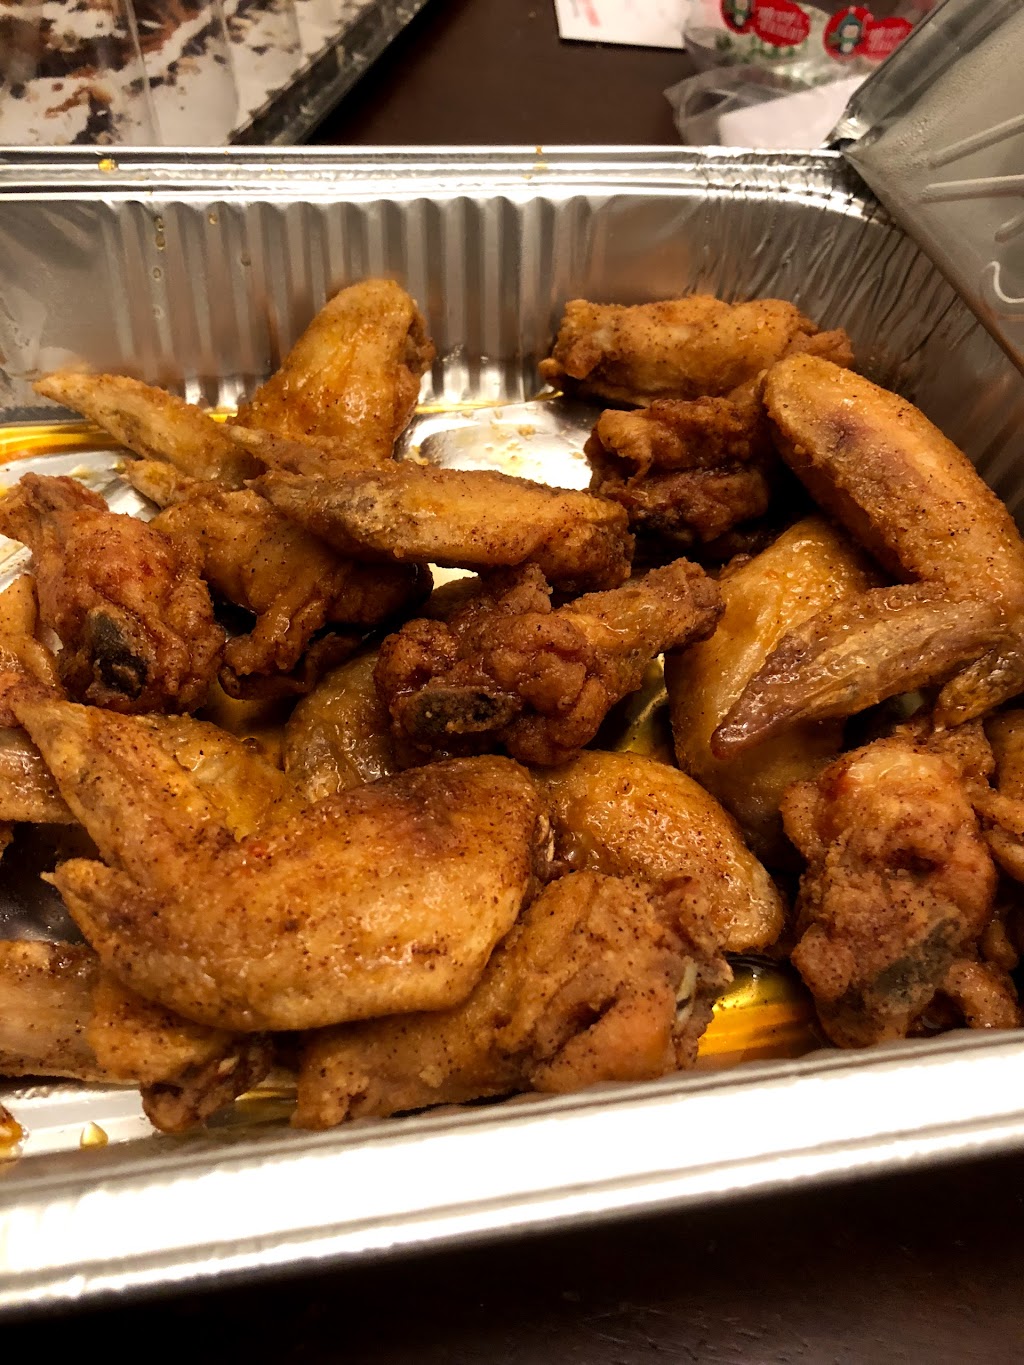 Wing It | 26 E Jimmie Leeds Rd, Galloway, NJ 08205 | Phone: (609) 652-3647